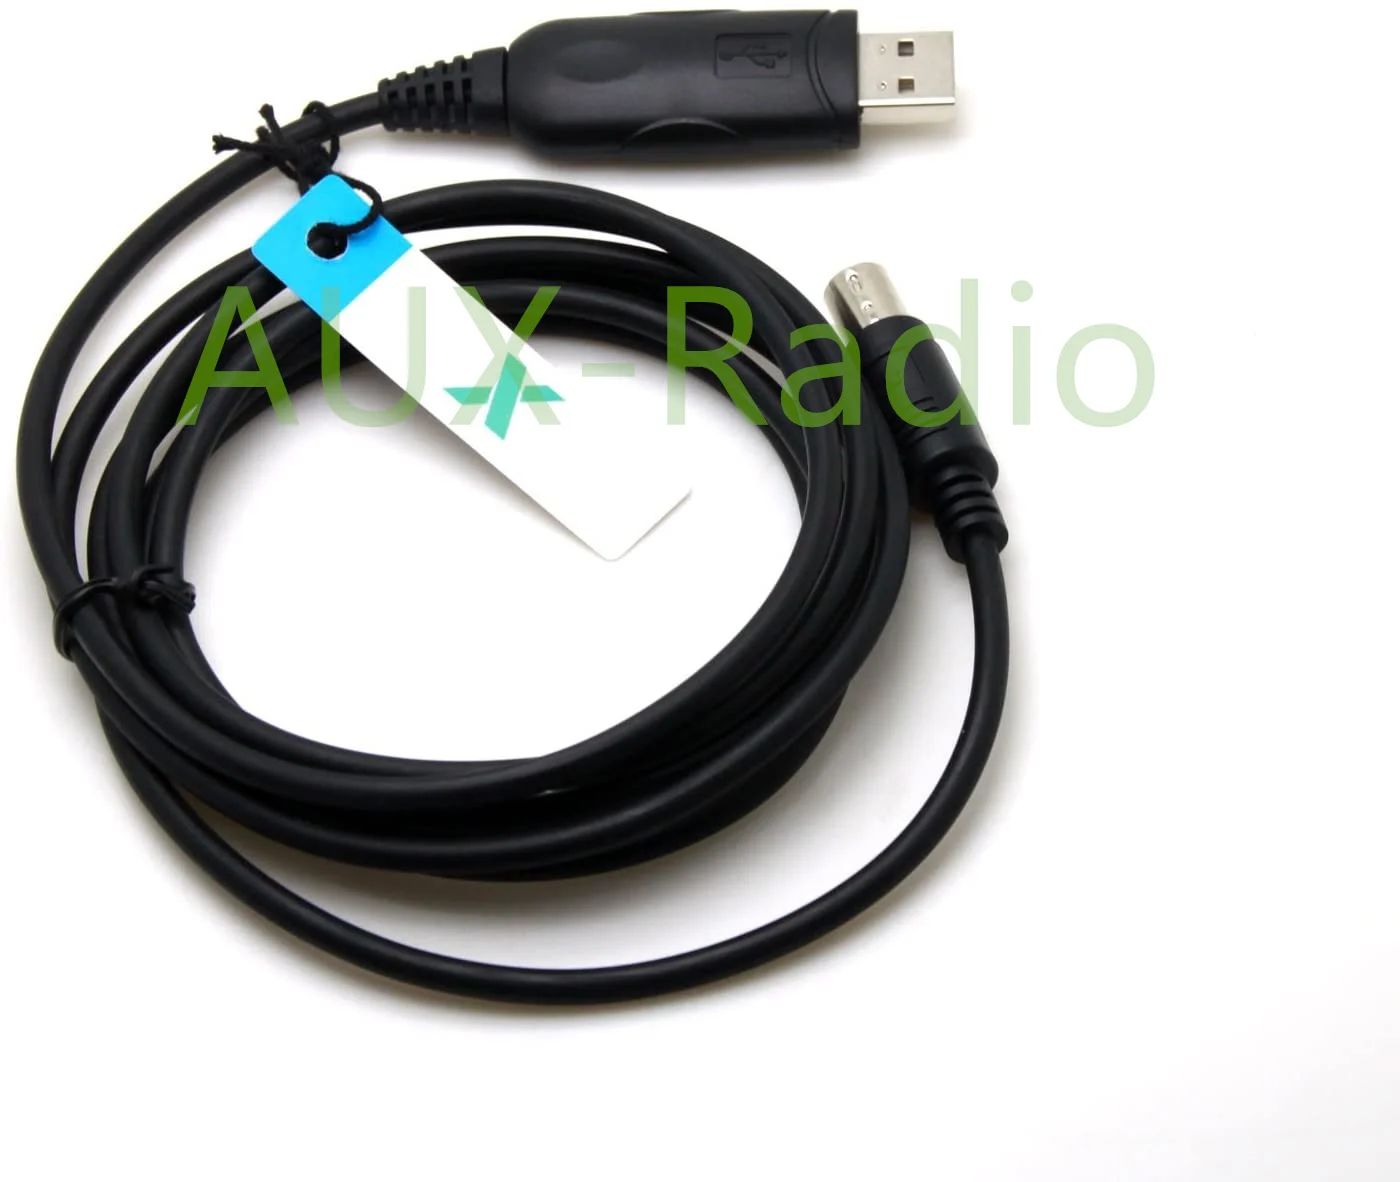 USB for Yaesu Two-Way Radio Programming Cable CT-62 CAT FT-100, FT-100D, FT-817, FT-817ND, FT-857, FT-857D, FT-897, FT-897D